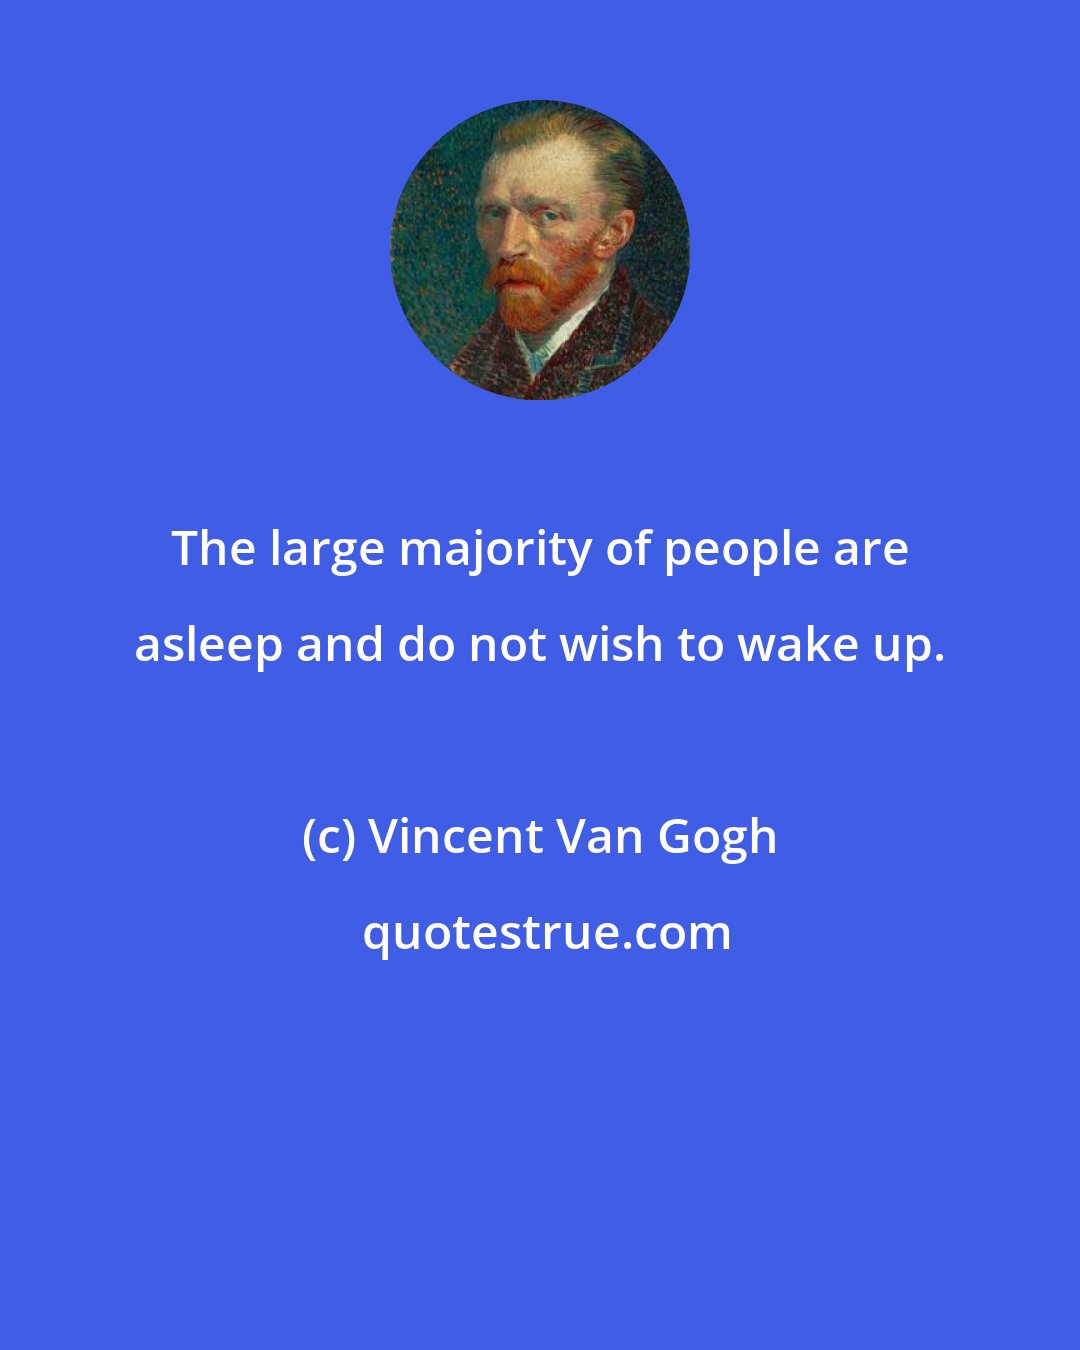 Vincent Van Gogh: The large majority of people are asleep and do not wish to wake up.